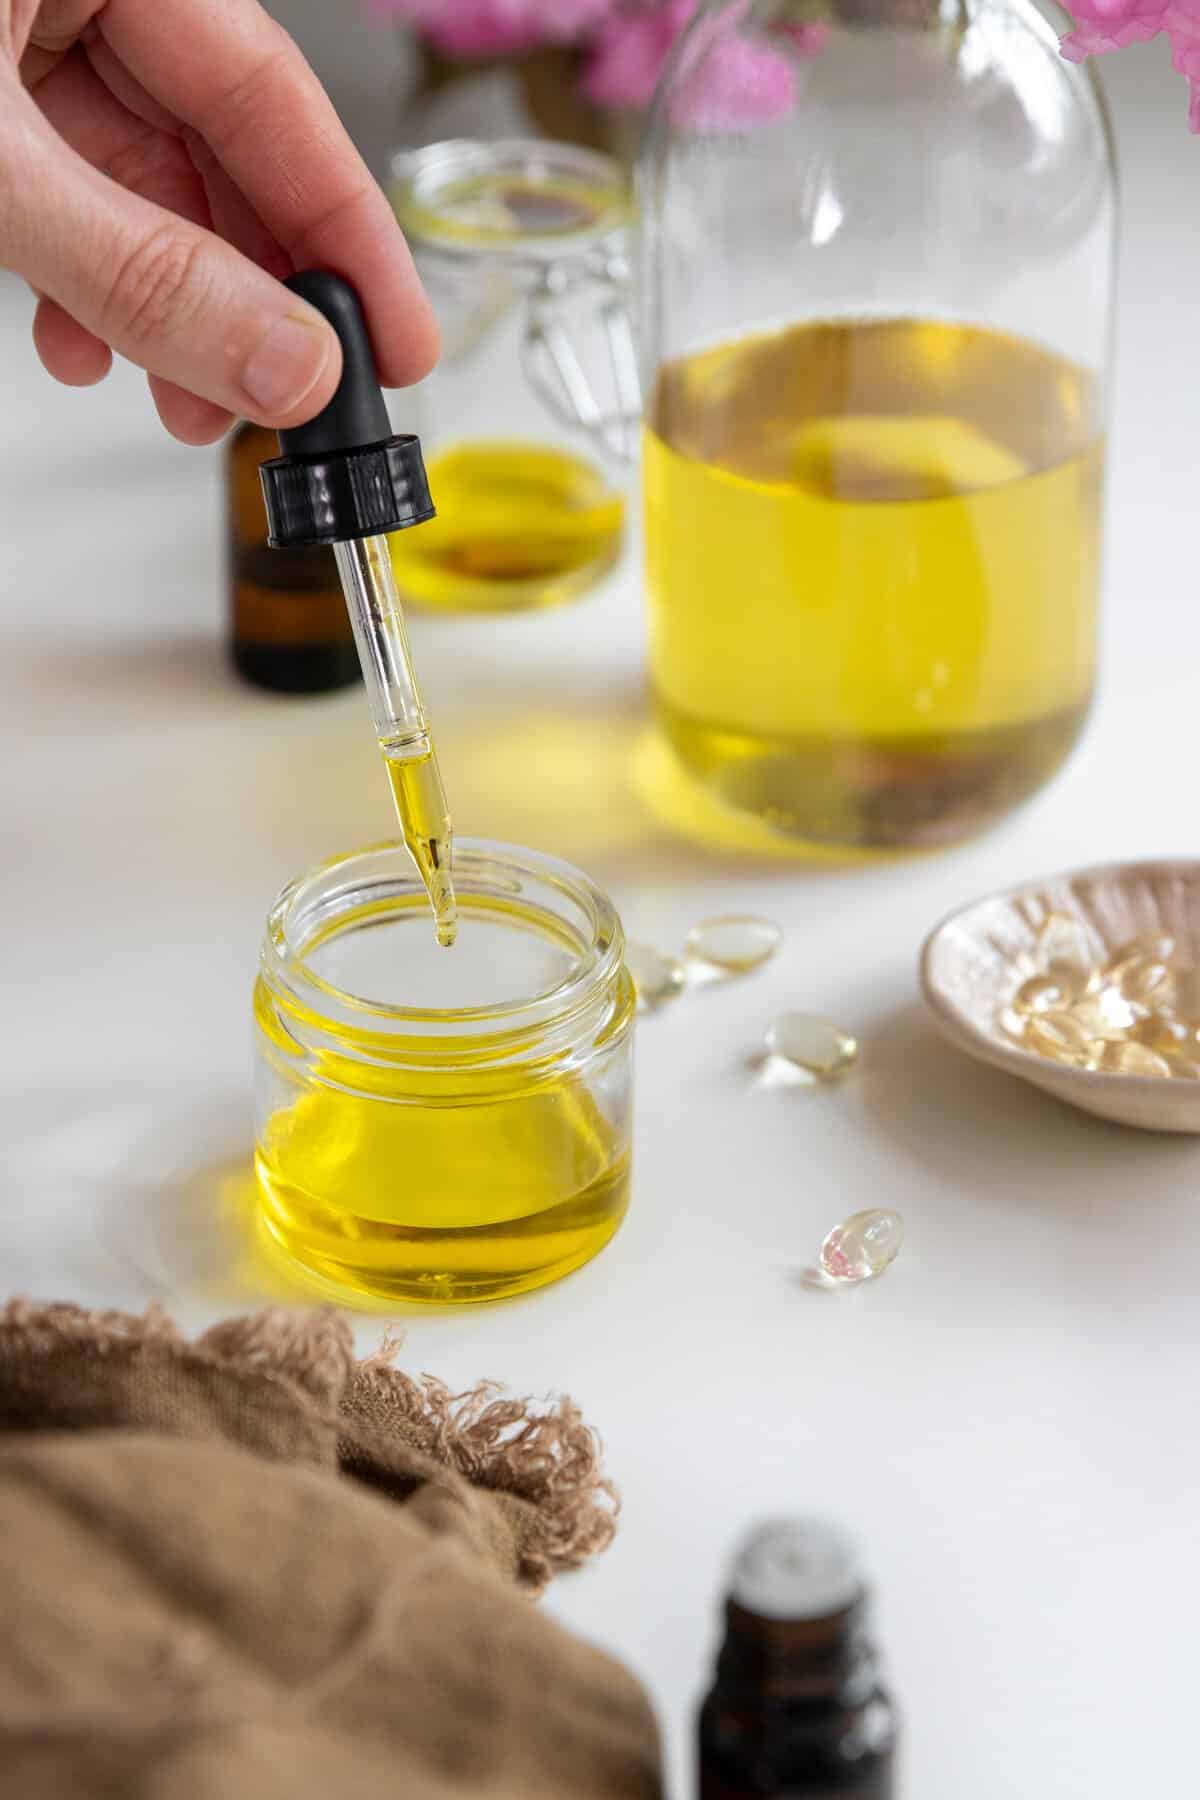 Instructions for homemade eyebrow serum with castor oil